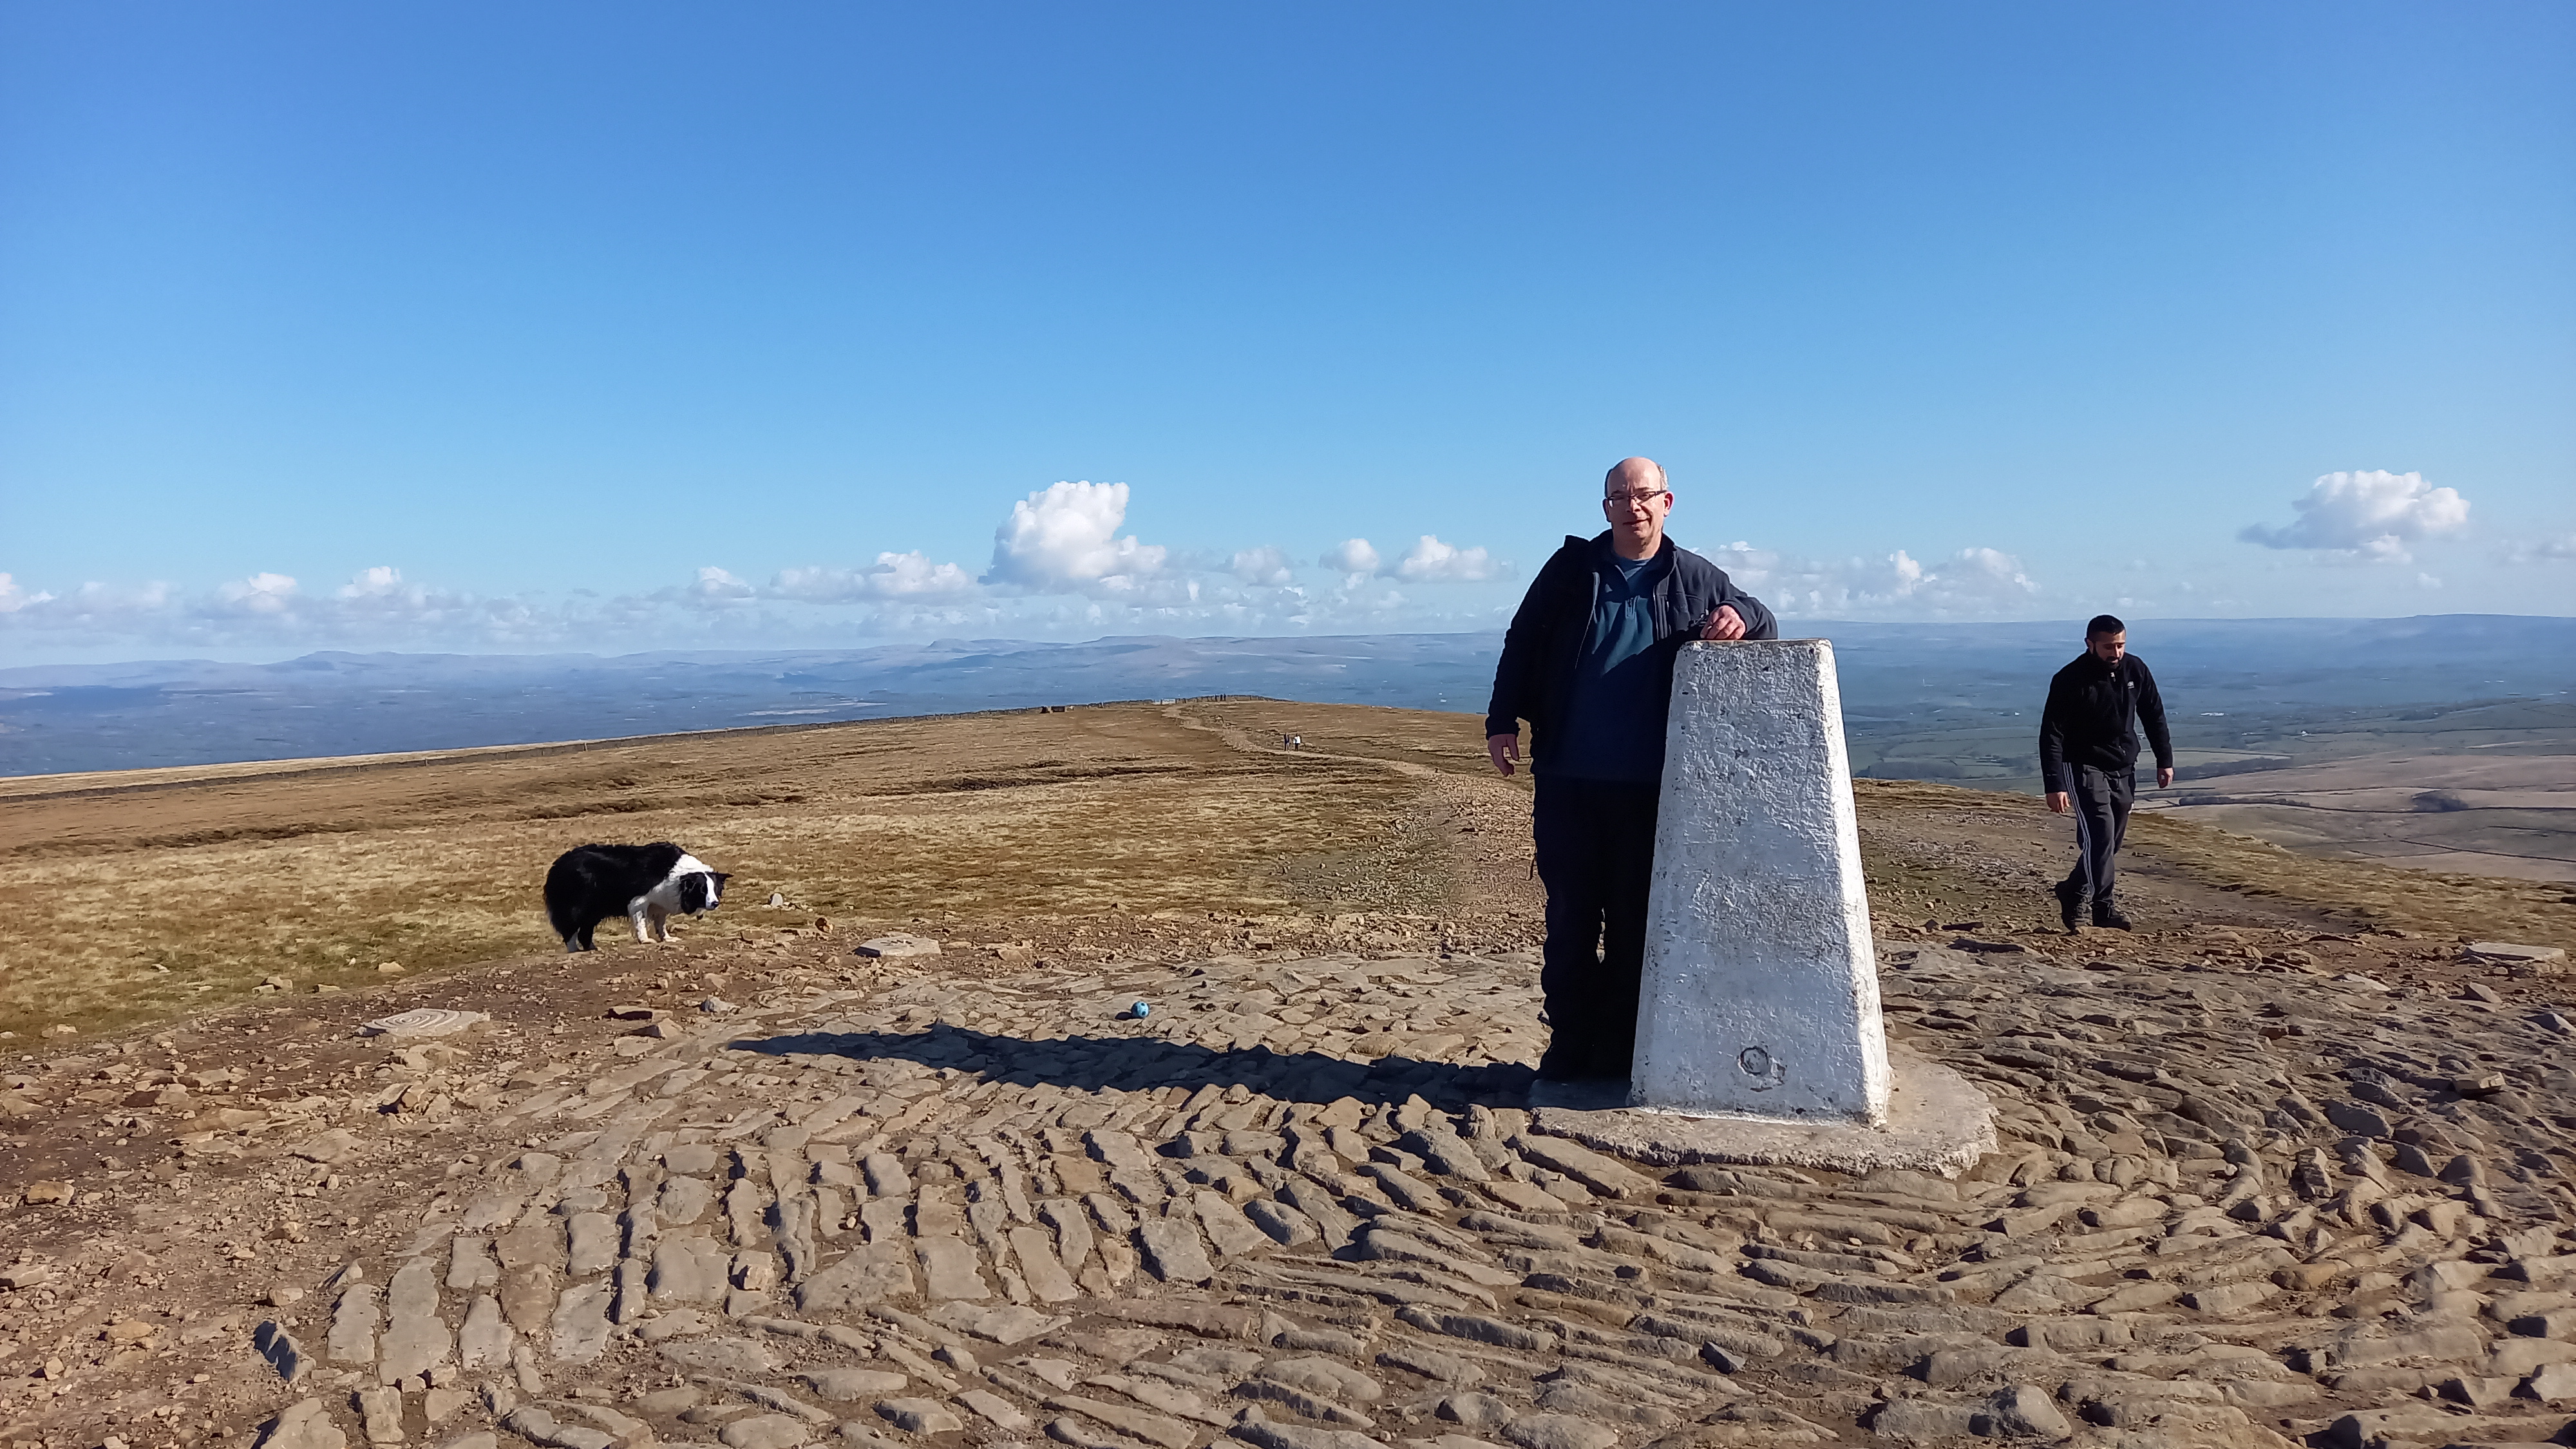 Peter on top of Pendle Hill